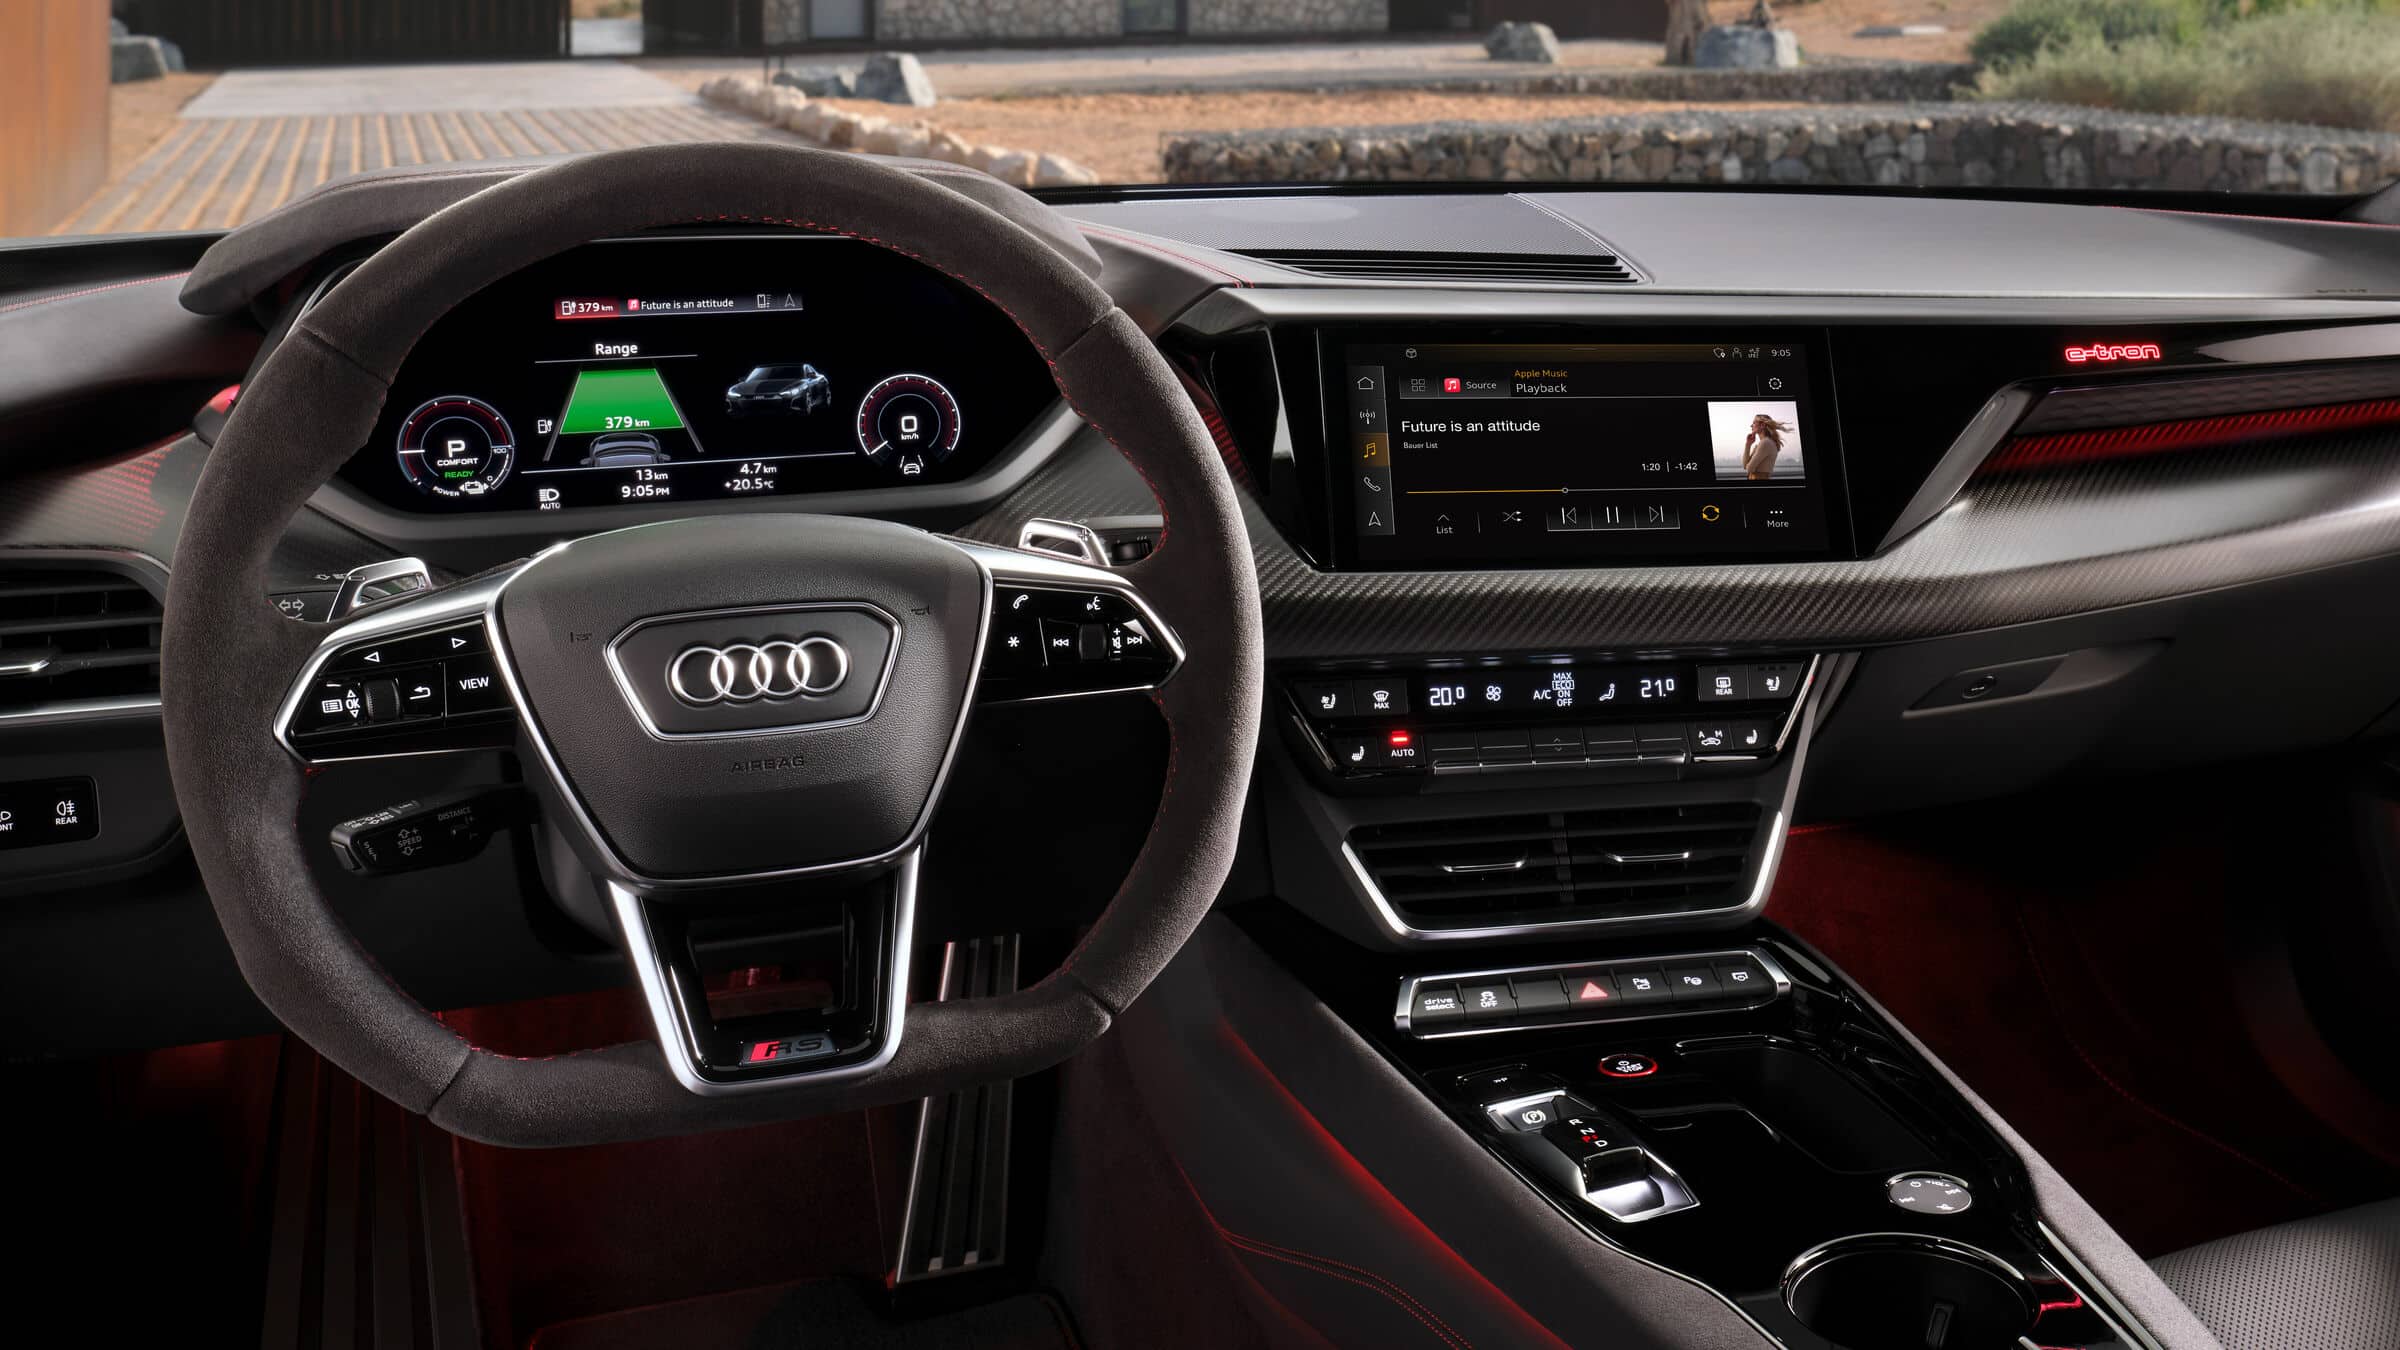 Apple Music, integrated in Audi's Multi-Media Interface screen, is showcased in this press photo